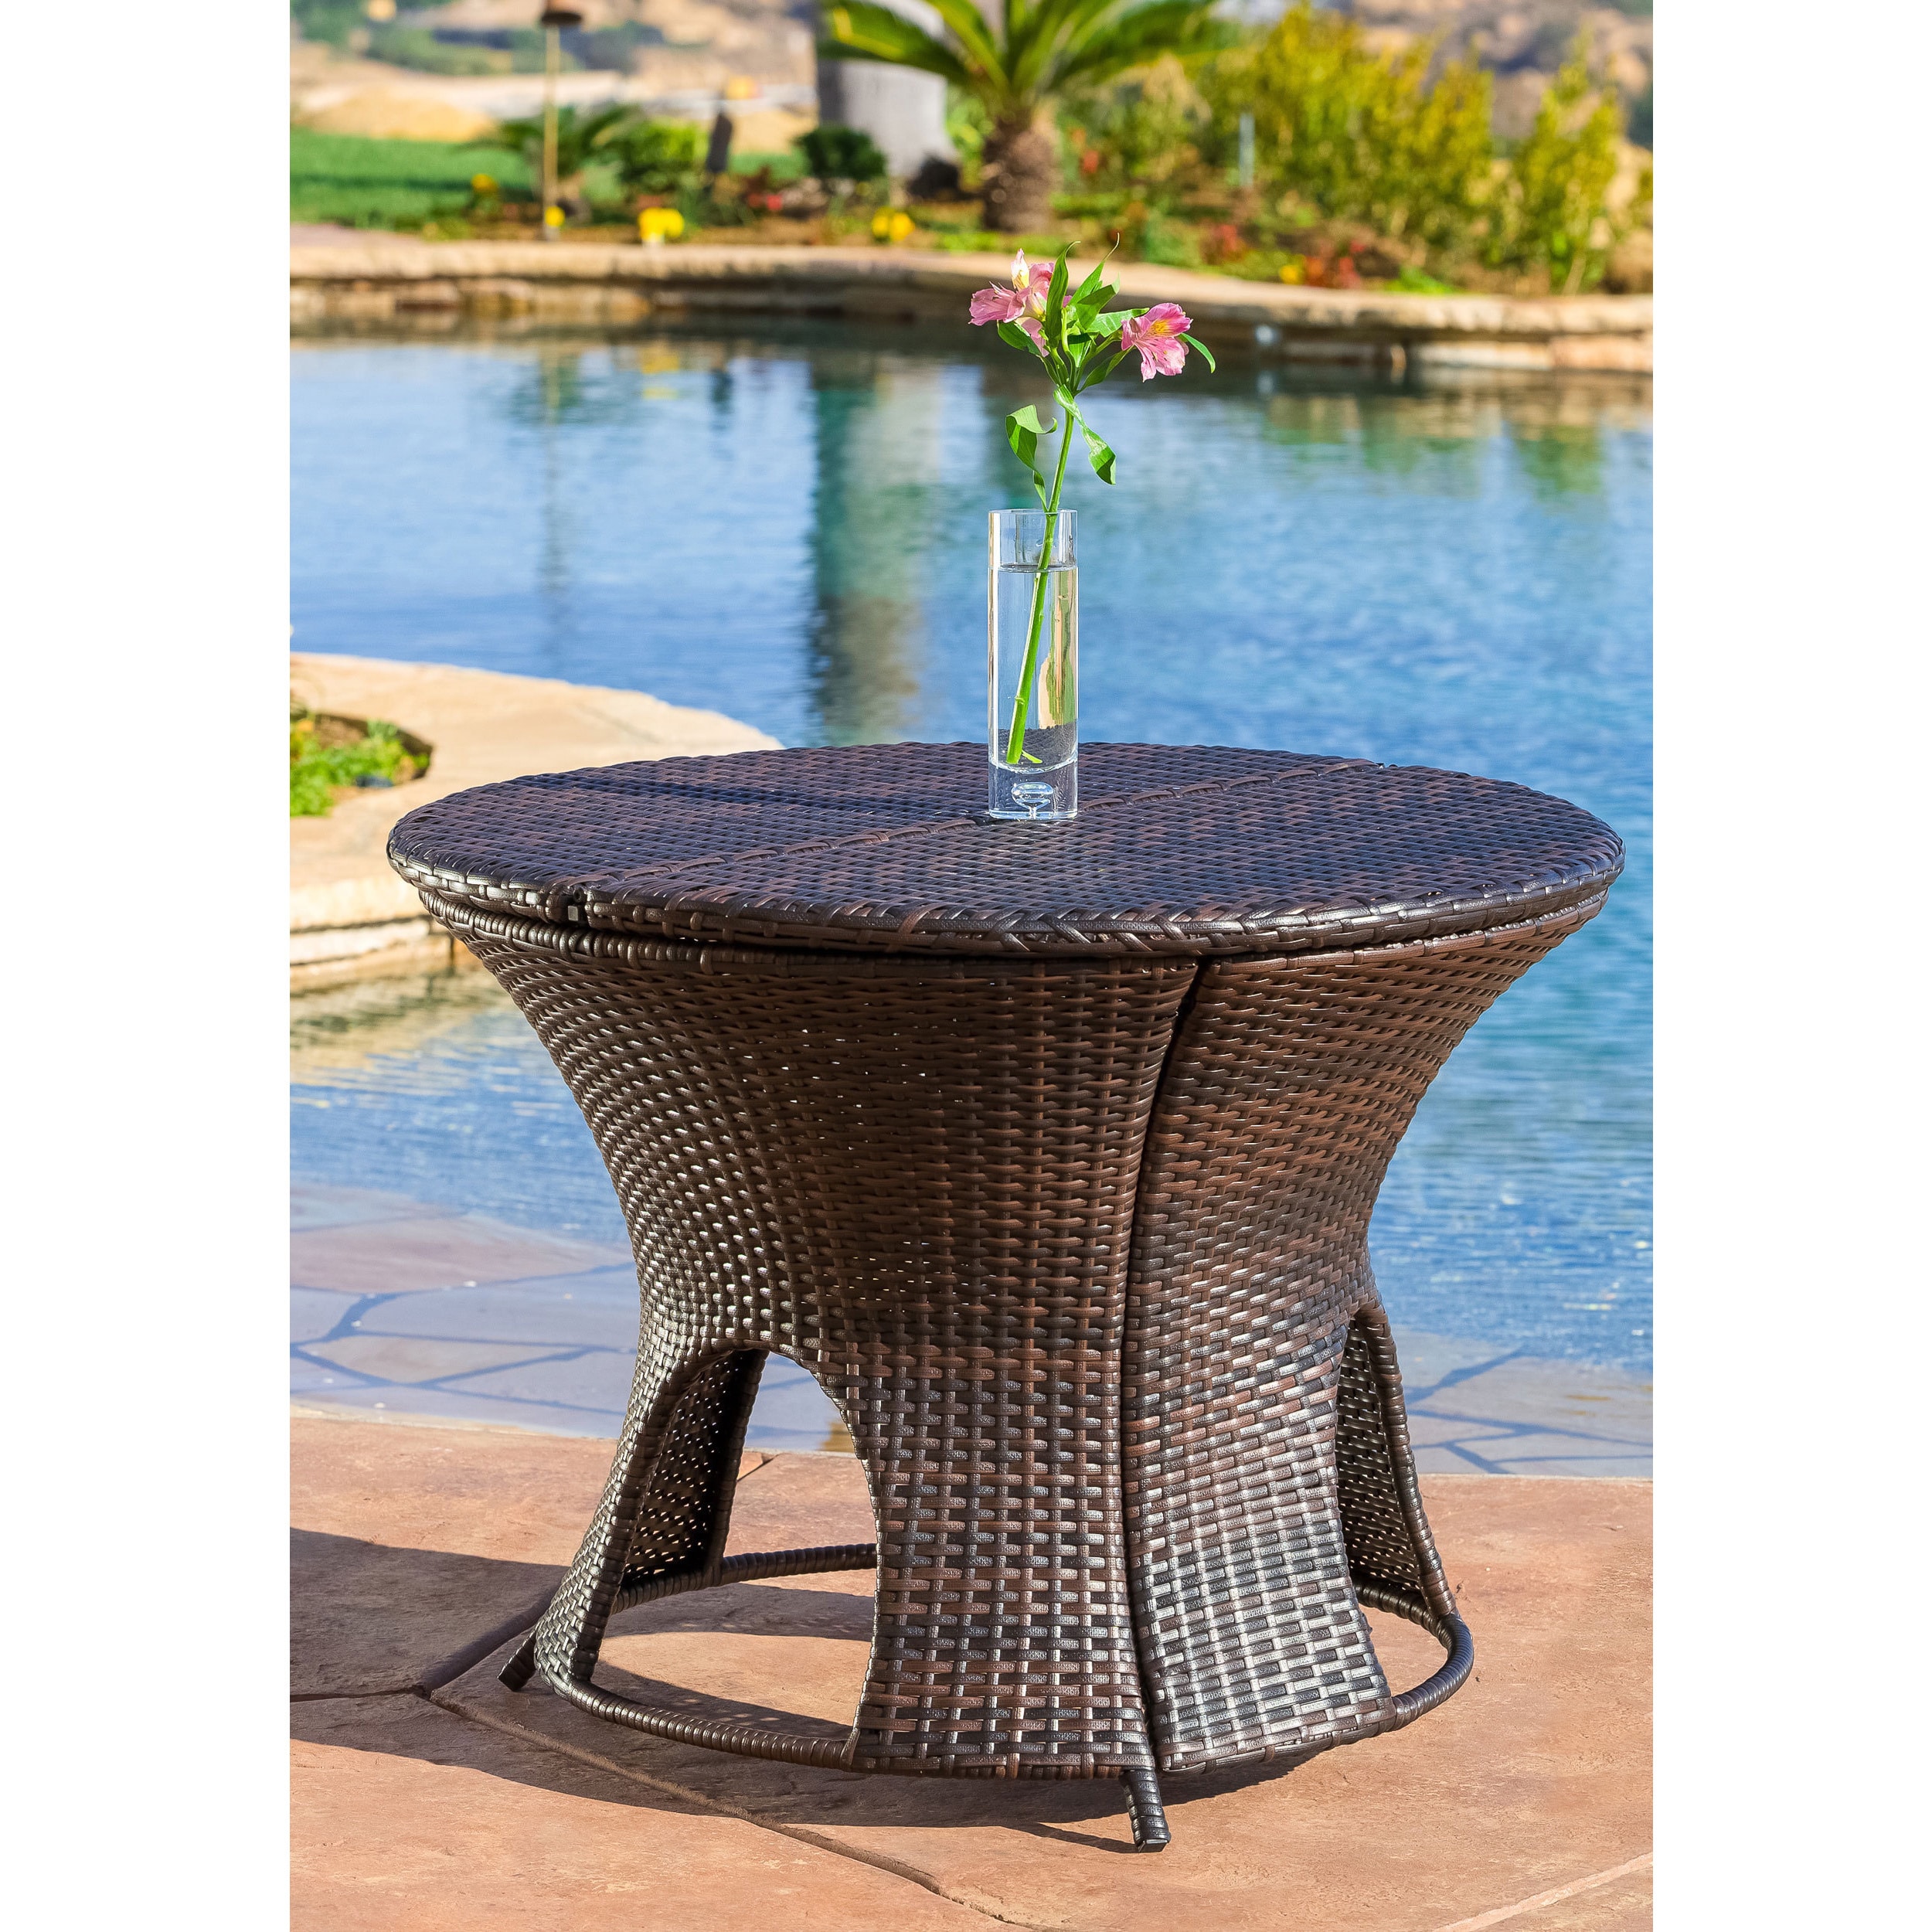 Christopher Knight Home Rodolfo Wicker Multibrown Outdoor Round Storage Table (MultibrownFeatures a double sided top that opens from both sidesIdeal for storing a variety of outdoor itemsSome assembly requiredDimensions 24.50 inches high x 32.75 inches w